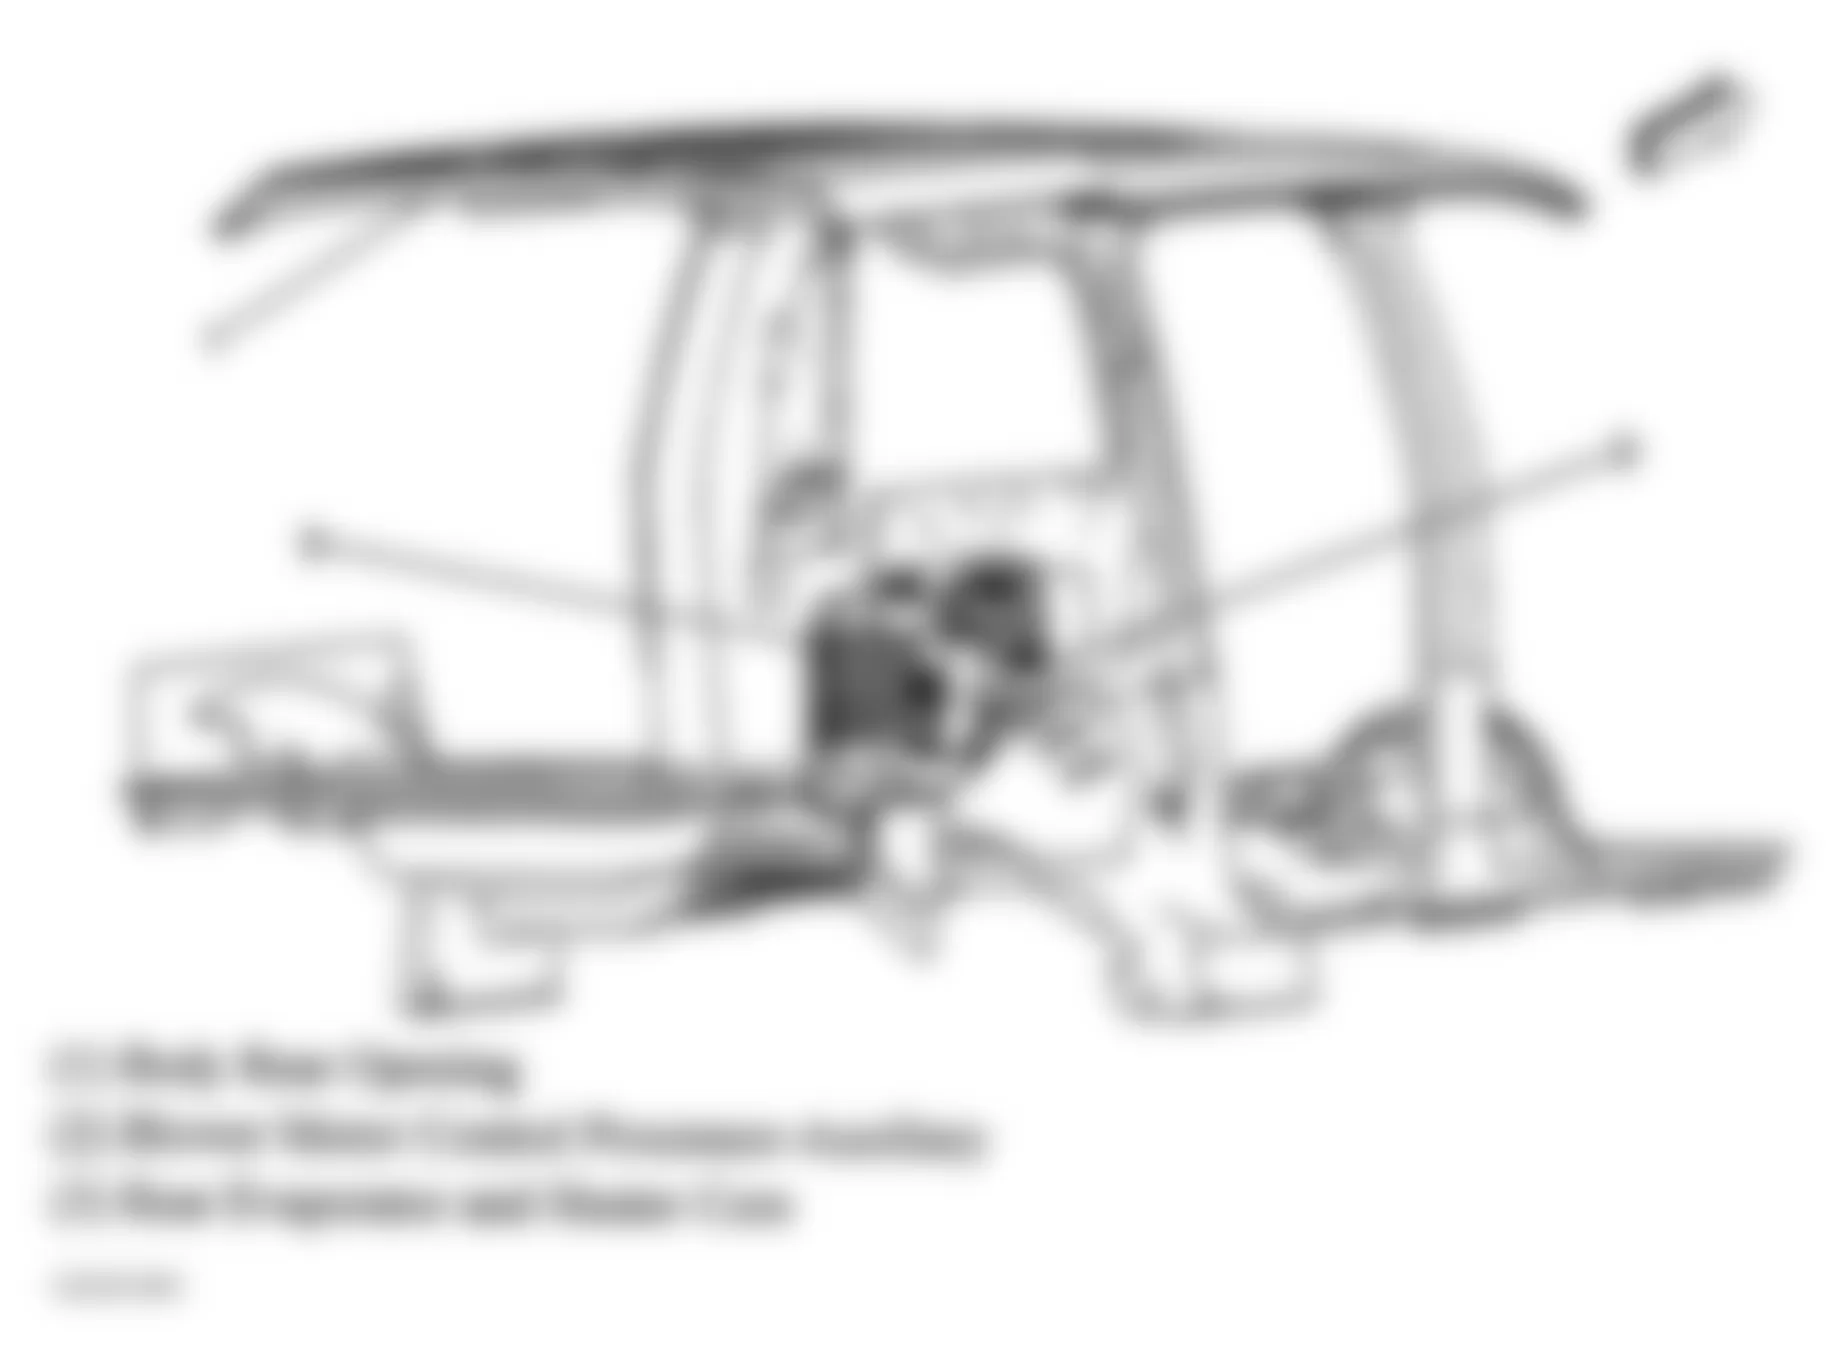 GMC Envoy XUV 2004 - Component Locations -  Right Rear Of Vehicle